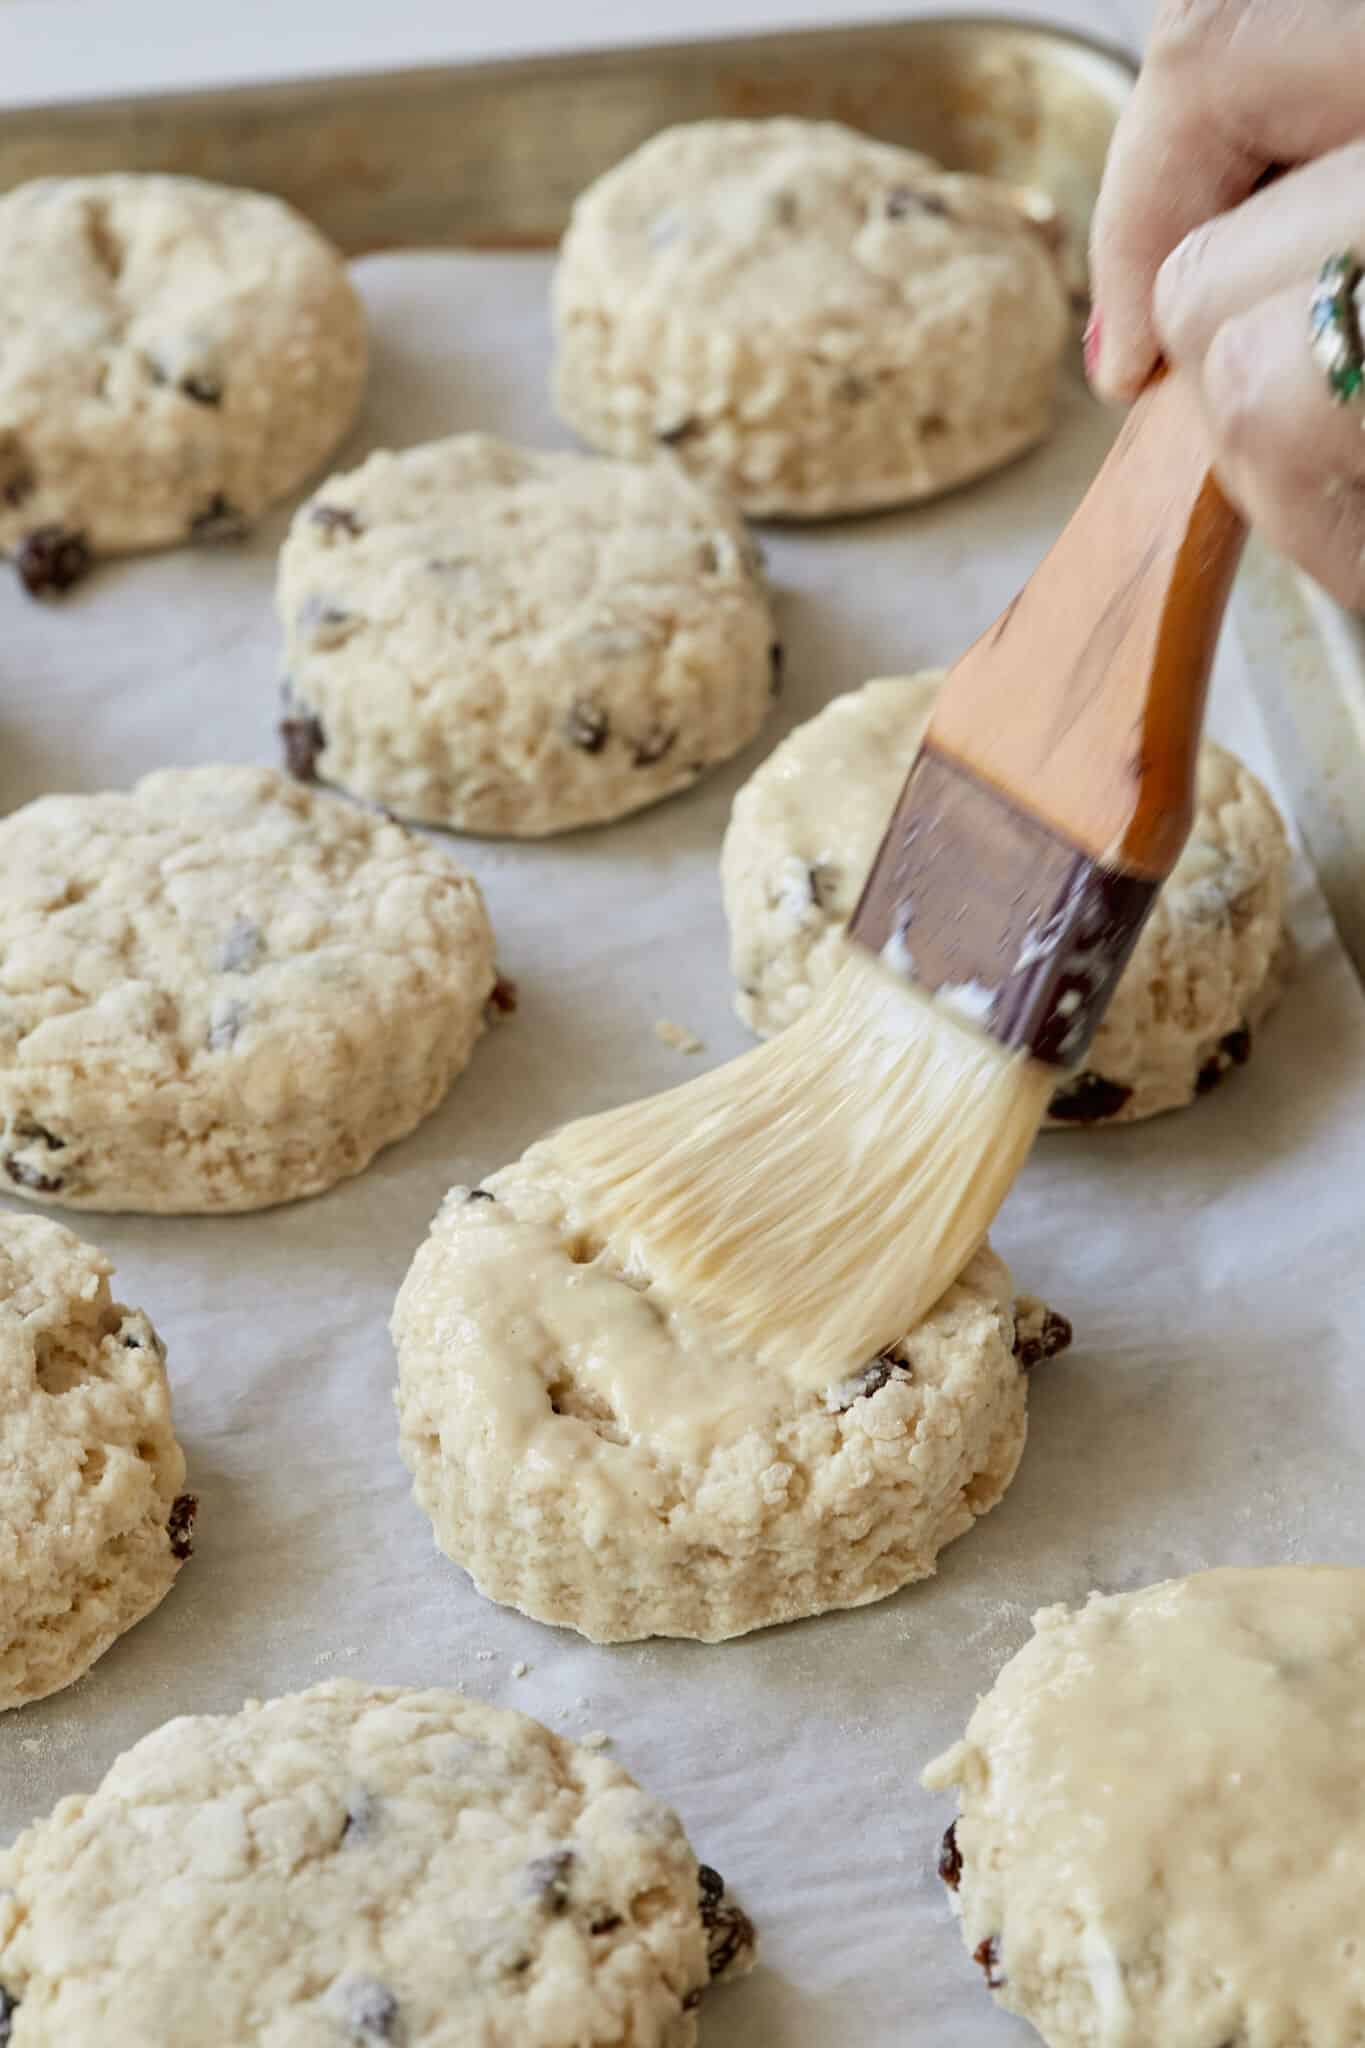 Step-by-step instructions on how to make scones: brush the scones with egg what before baking.